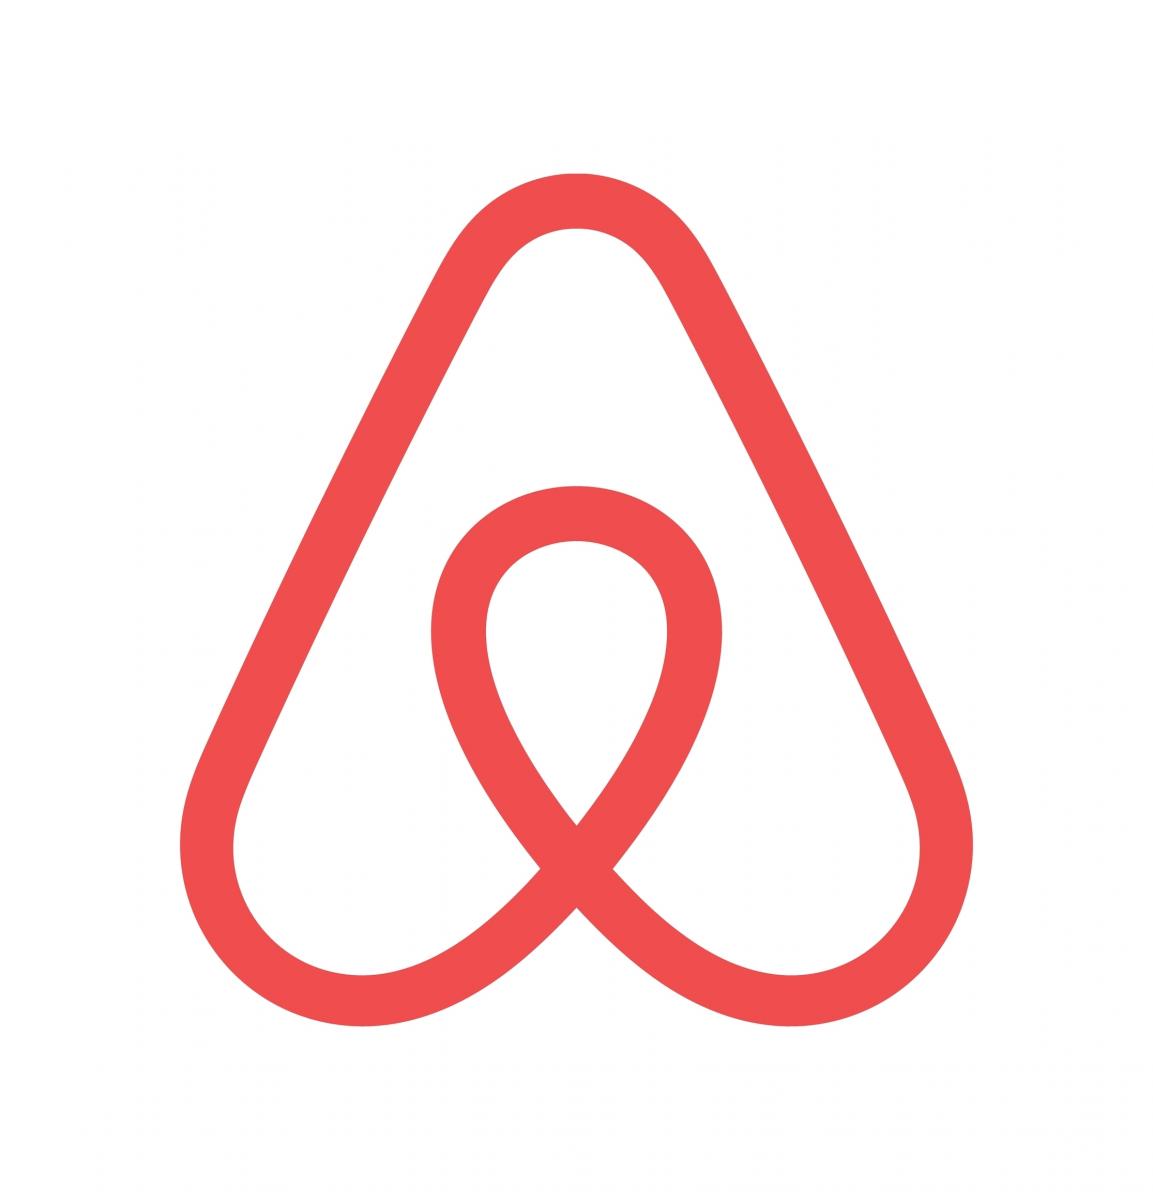 Airbnb Camera ban - new concerns over landlords’ insurance